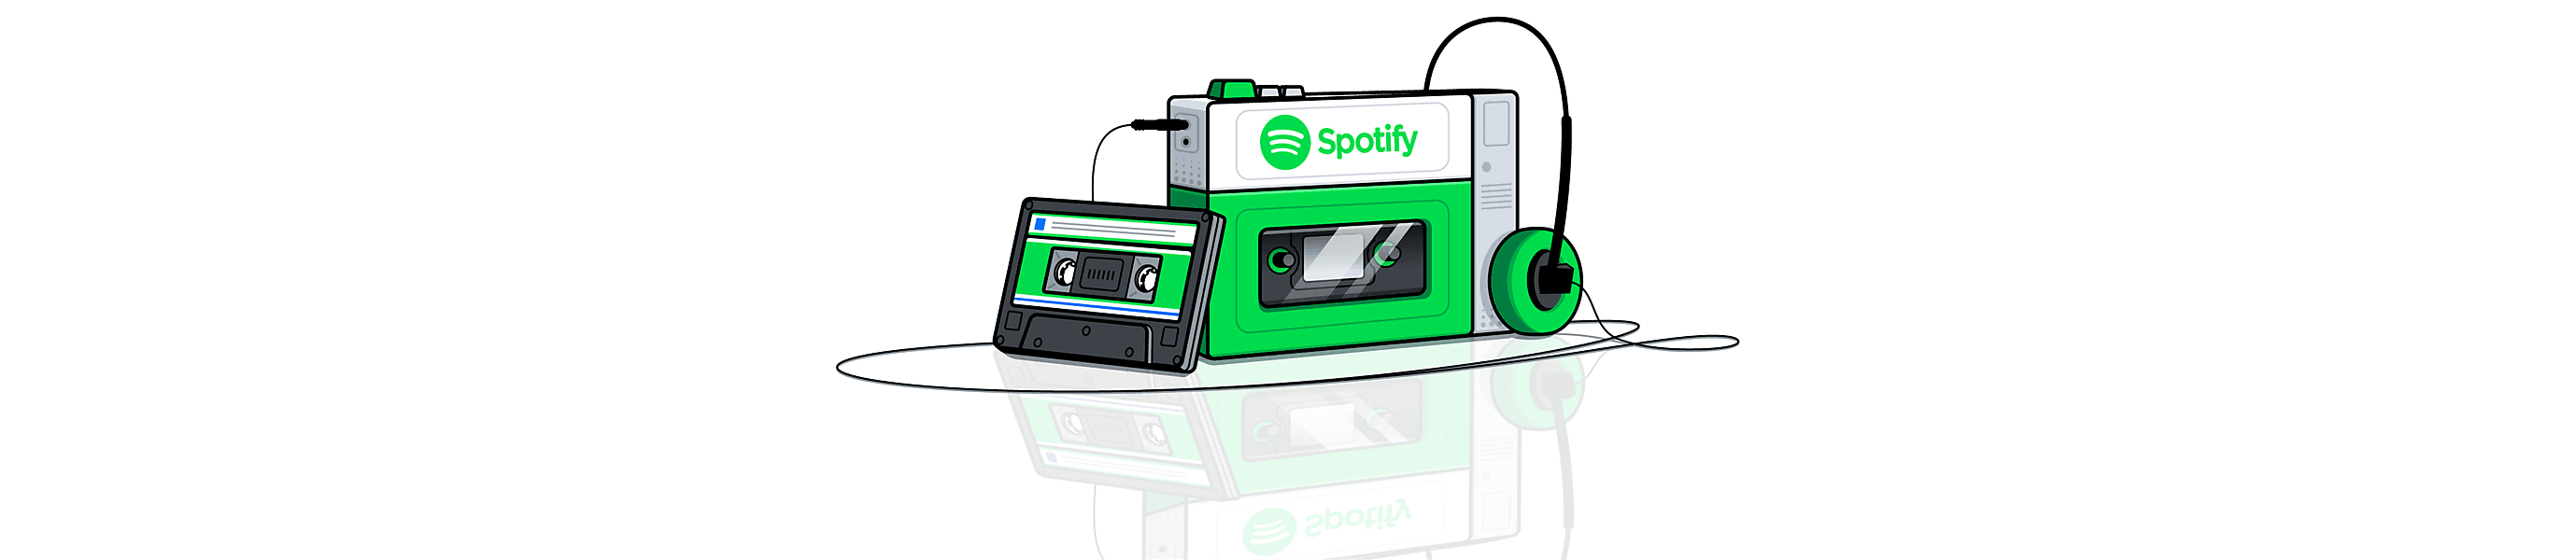 How to Make a Music Streaming App Like Spotify?